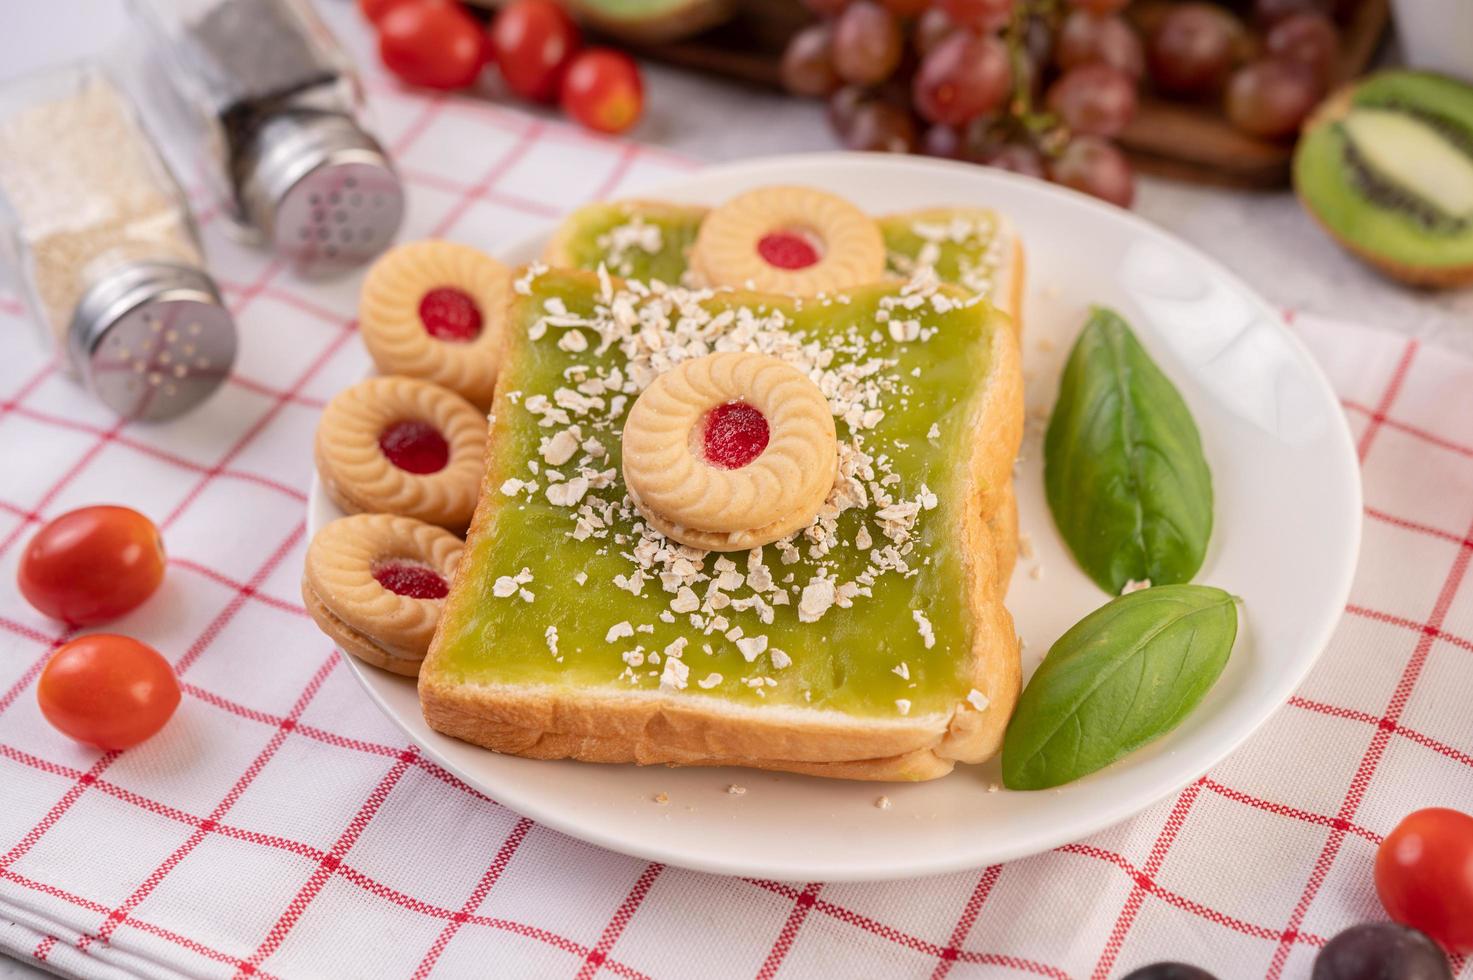 Bread covered with pandan custard and stuffed with dessert photo